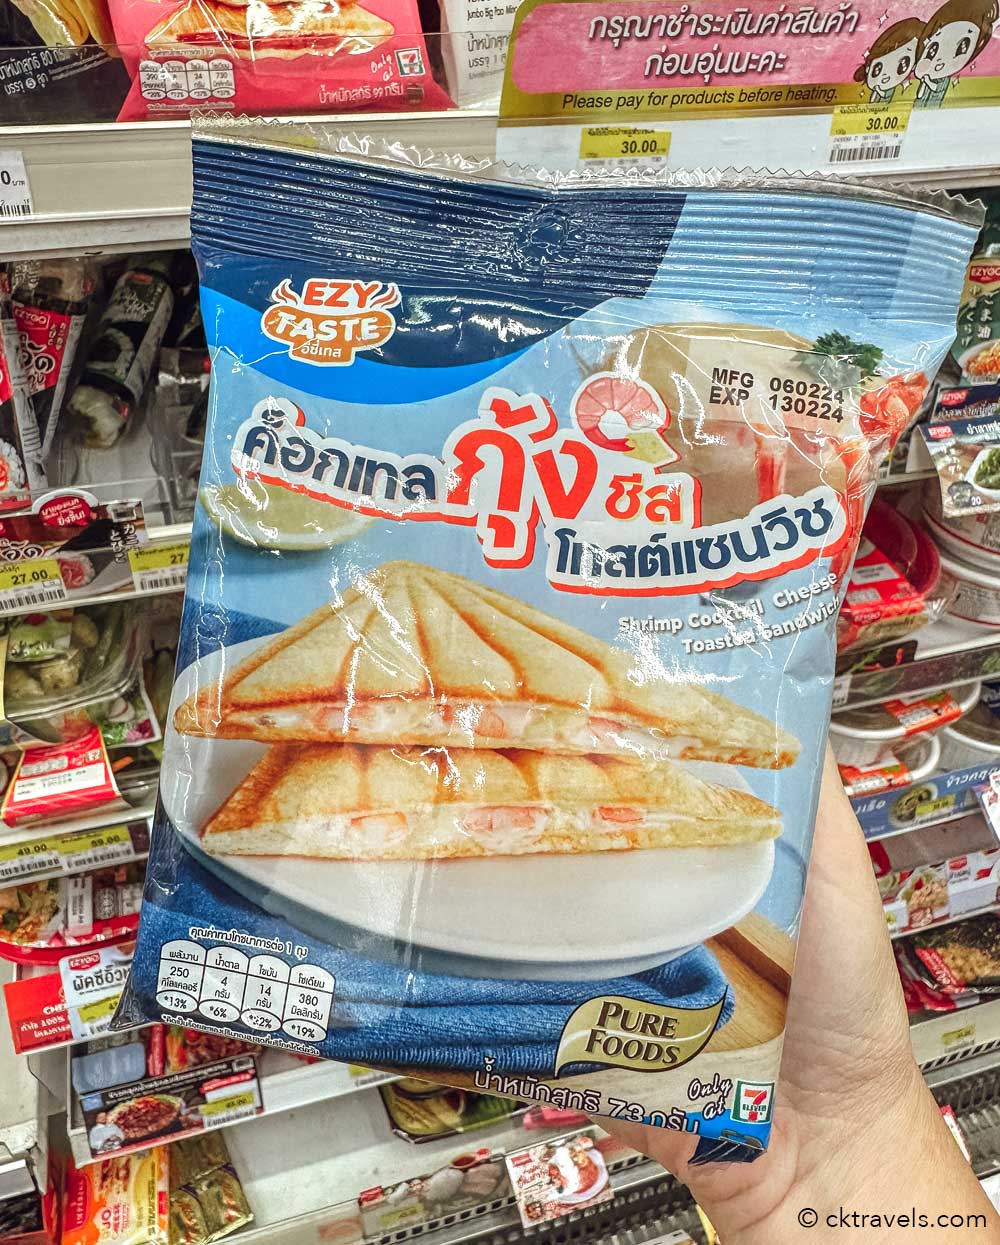 Shrimp Cocktail Cheese Toasted Sandwich at 7-eleven